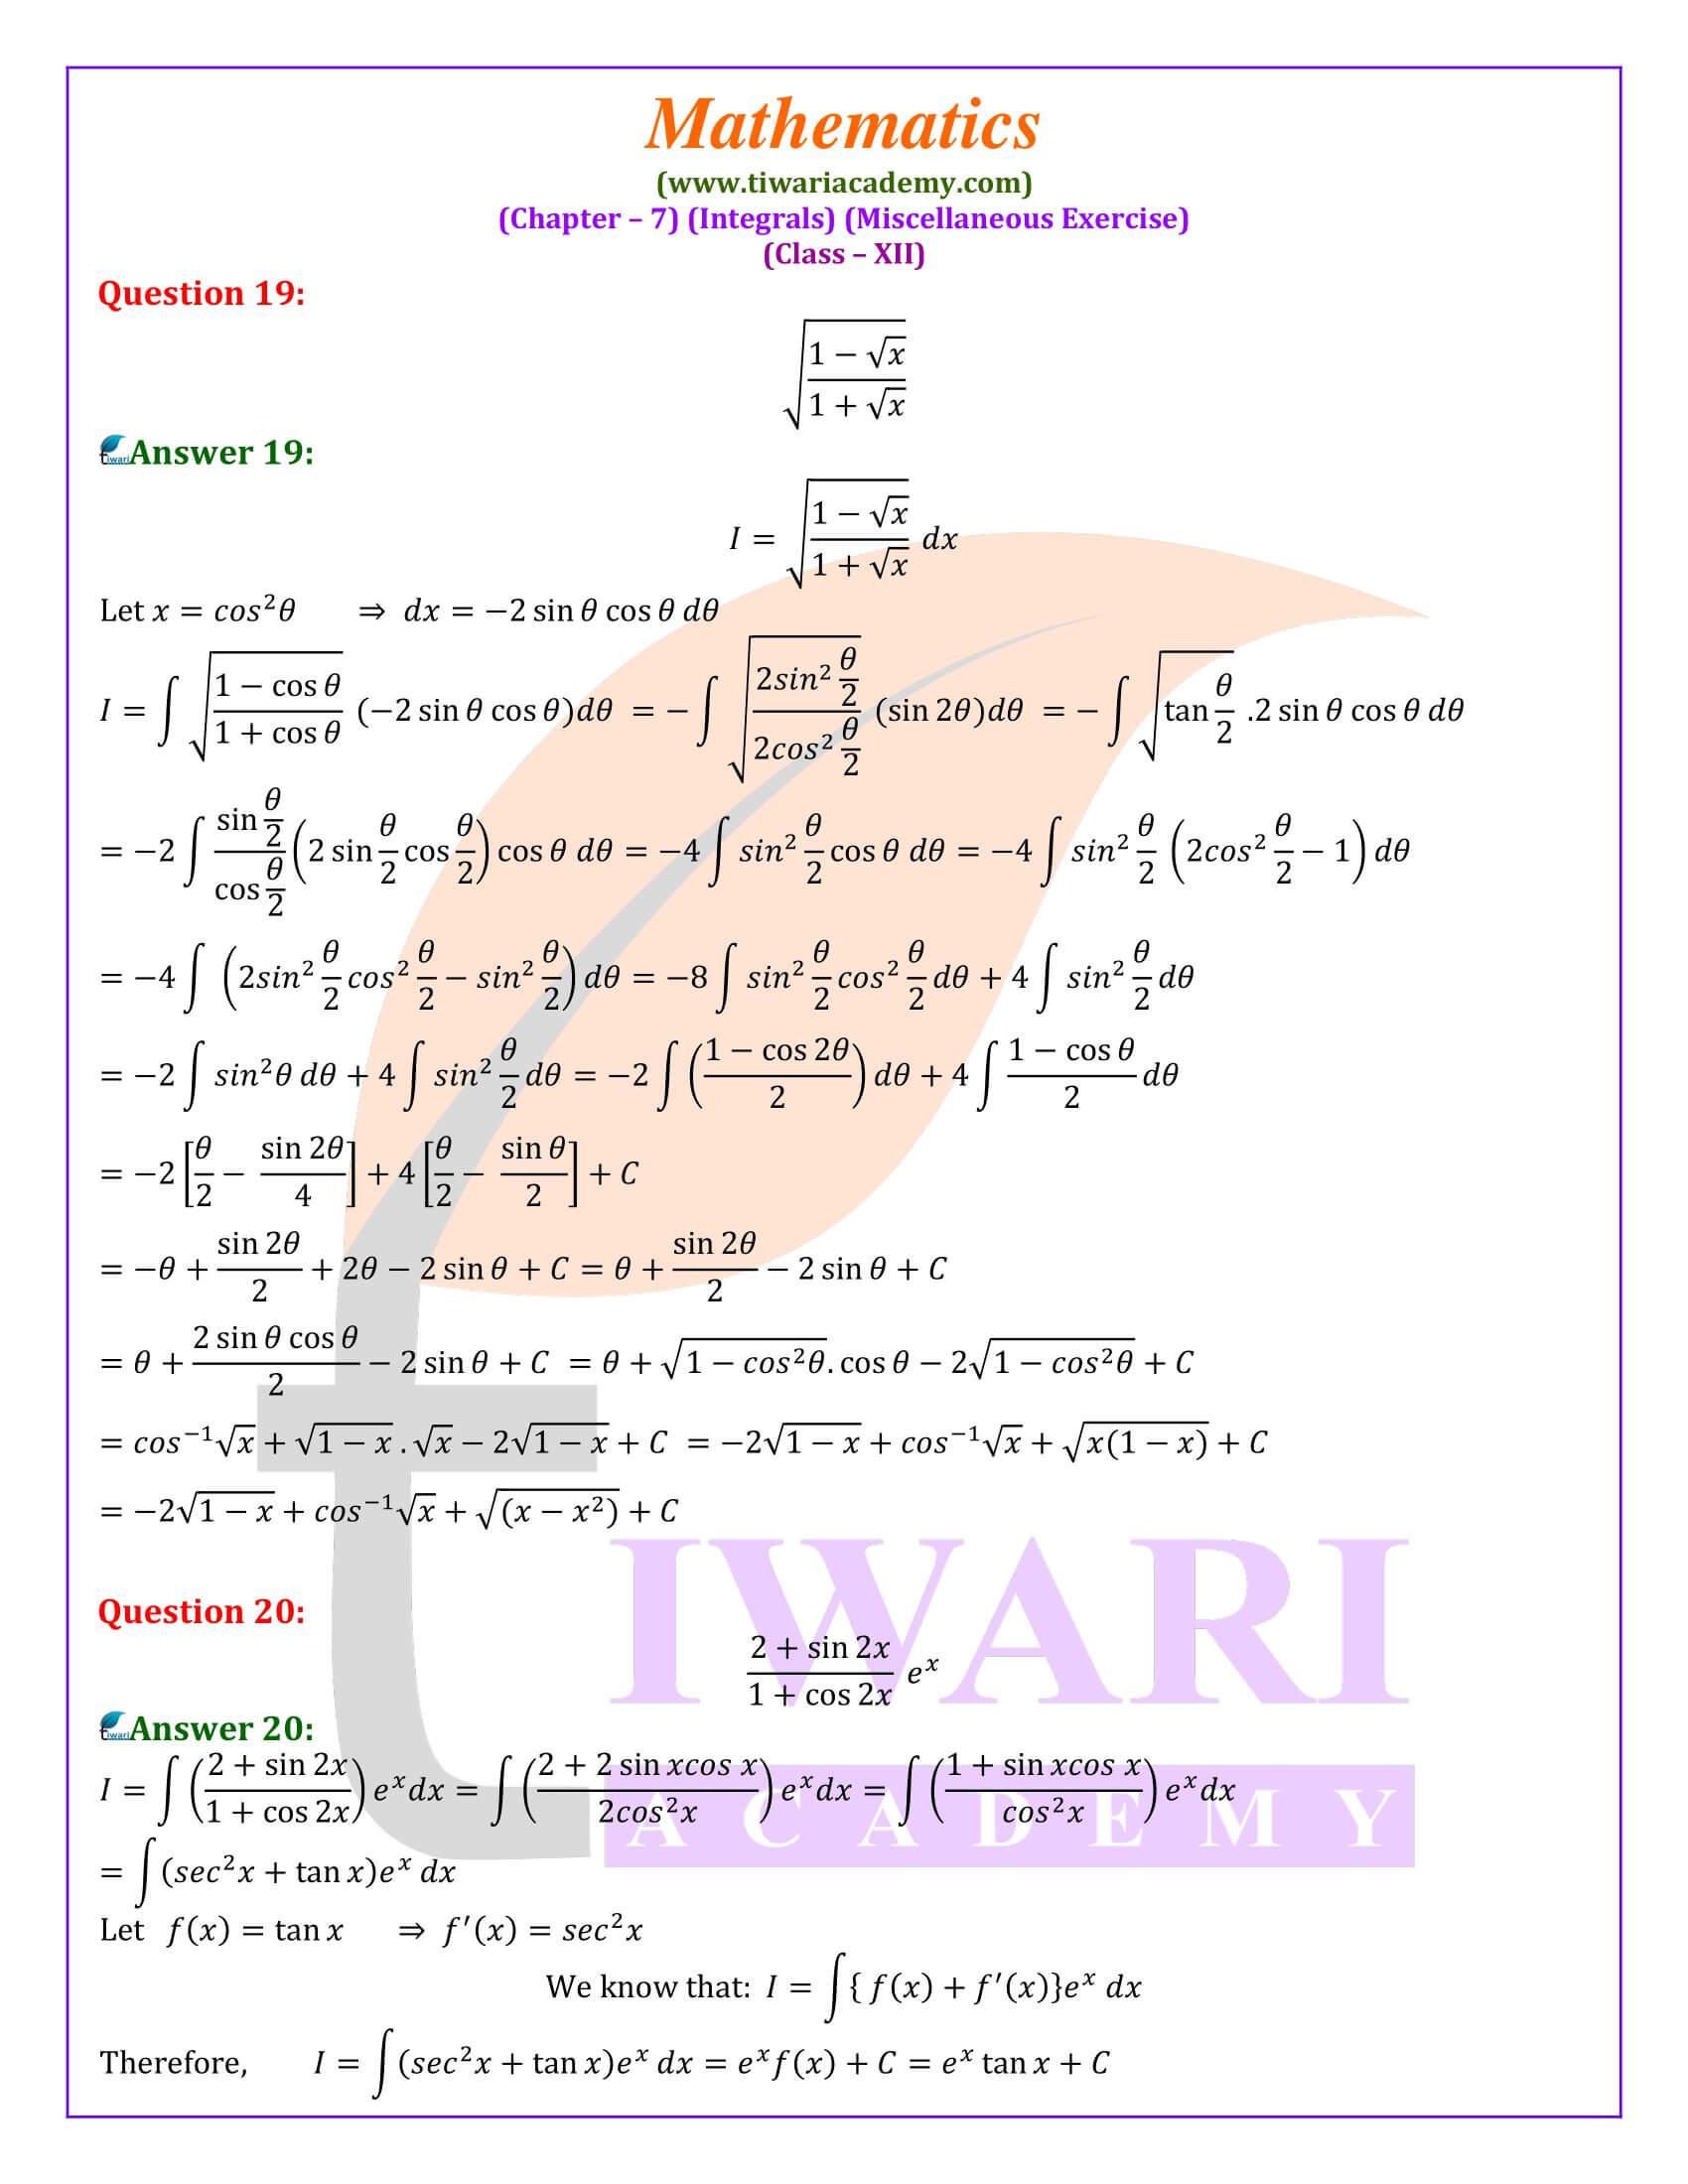 NCERT Solutions for Class 12 Maths Chapter 7 Misc. Exercise in English Medium